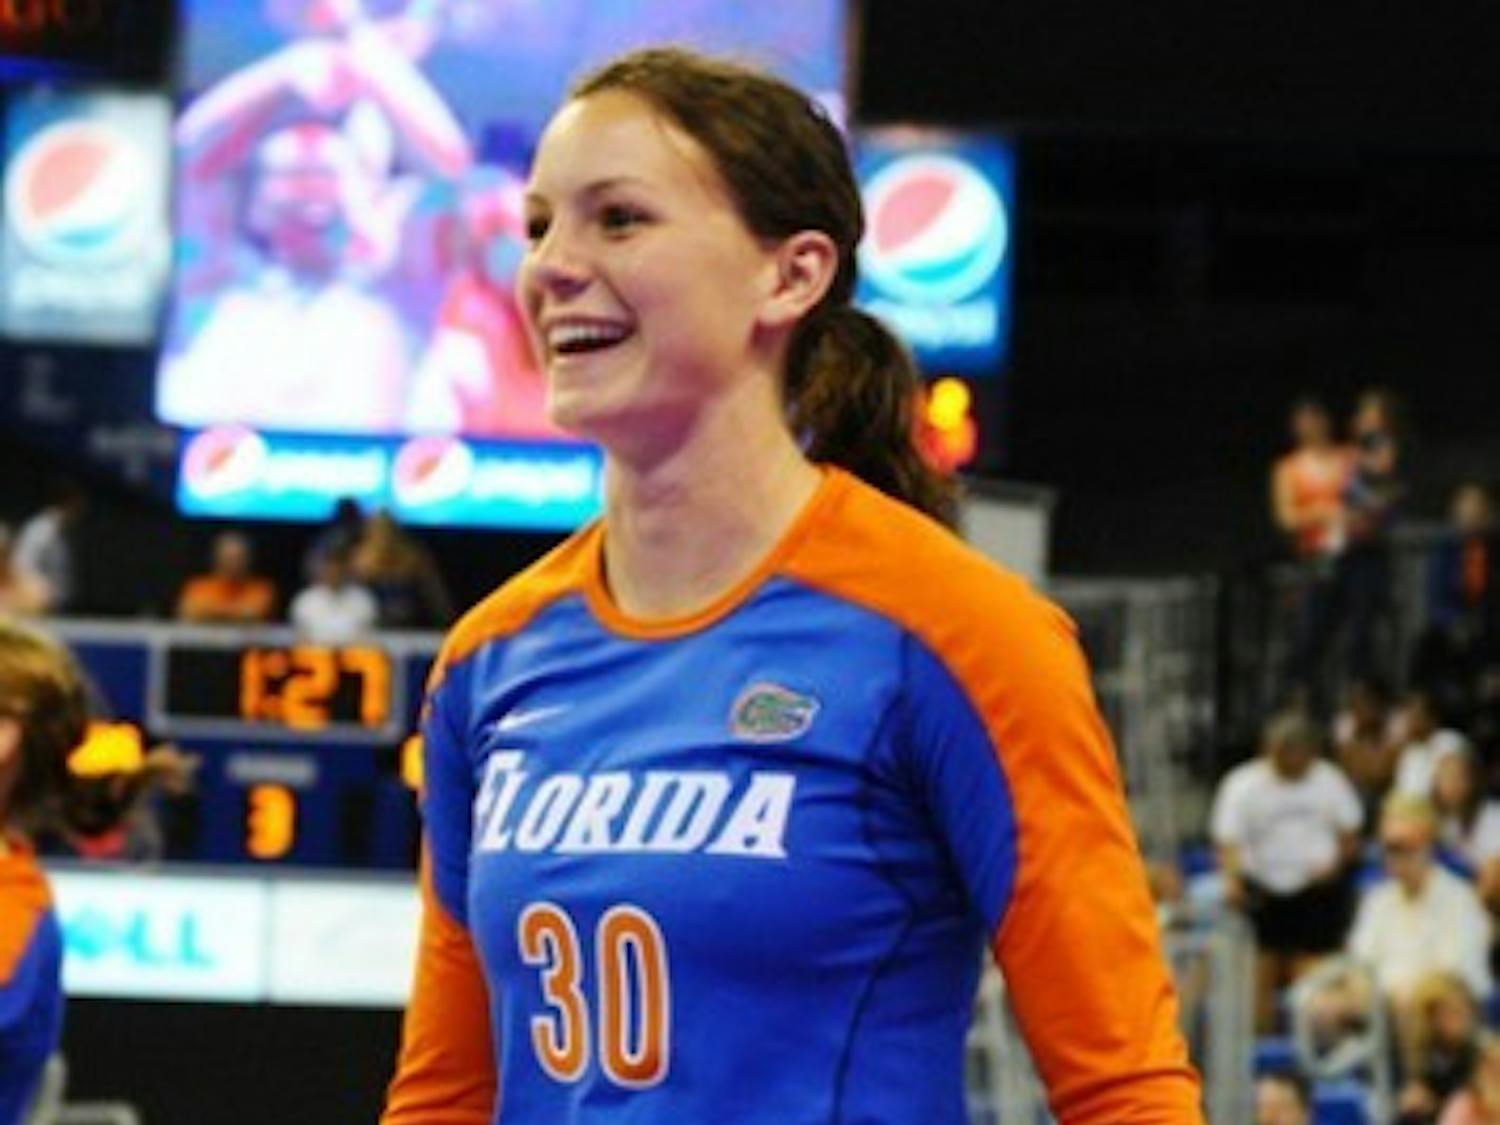 Florida sophomore defensive specialist Holly Pole celebrates during a match in 2011.